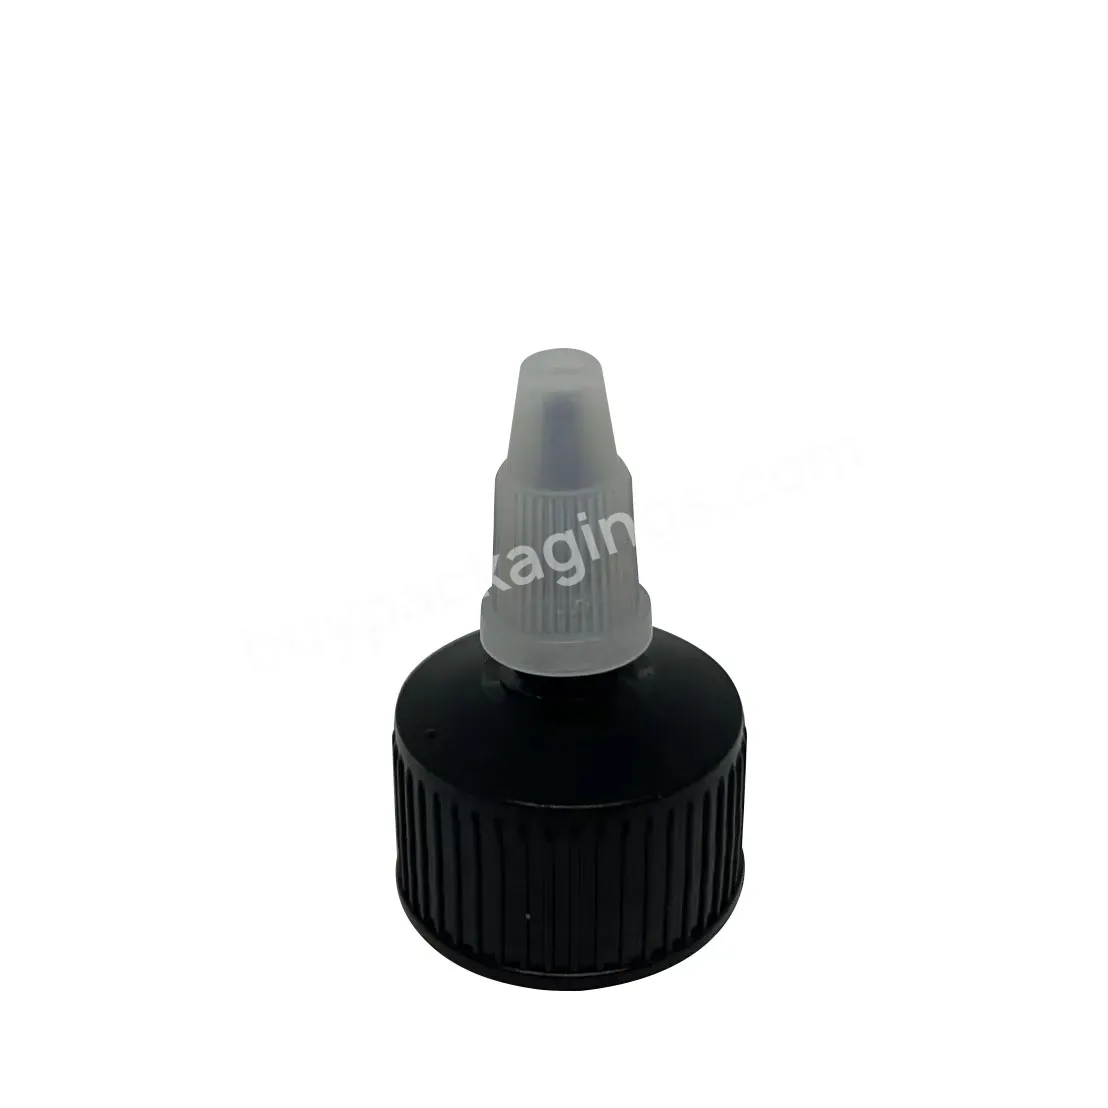 18 20 24 Dental Gel Water Cover Pointed Mouth Cap - Buy Pp Material,18 20 24 Manhole Cover.